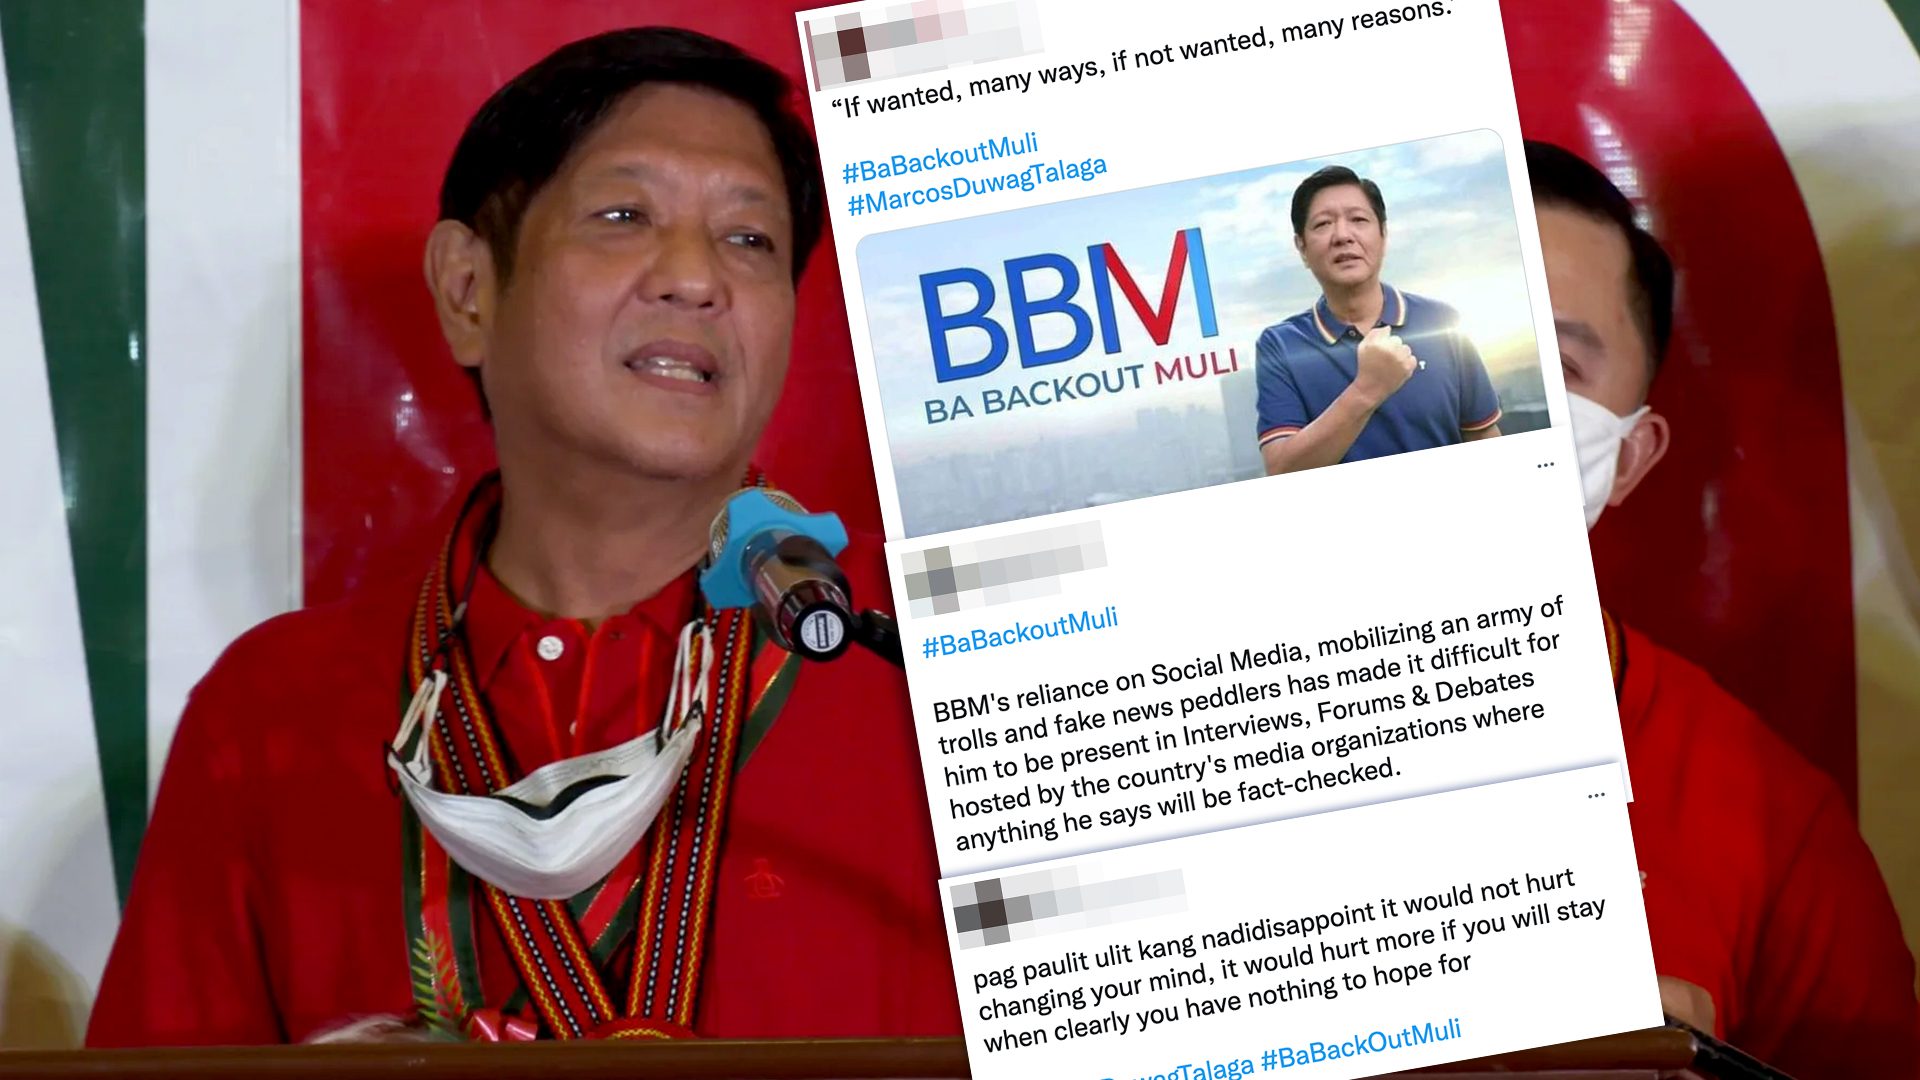 ‘#BaBackoutMuli’: Frontrunner Marcos a no-show in forum again